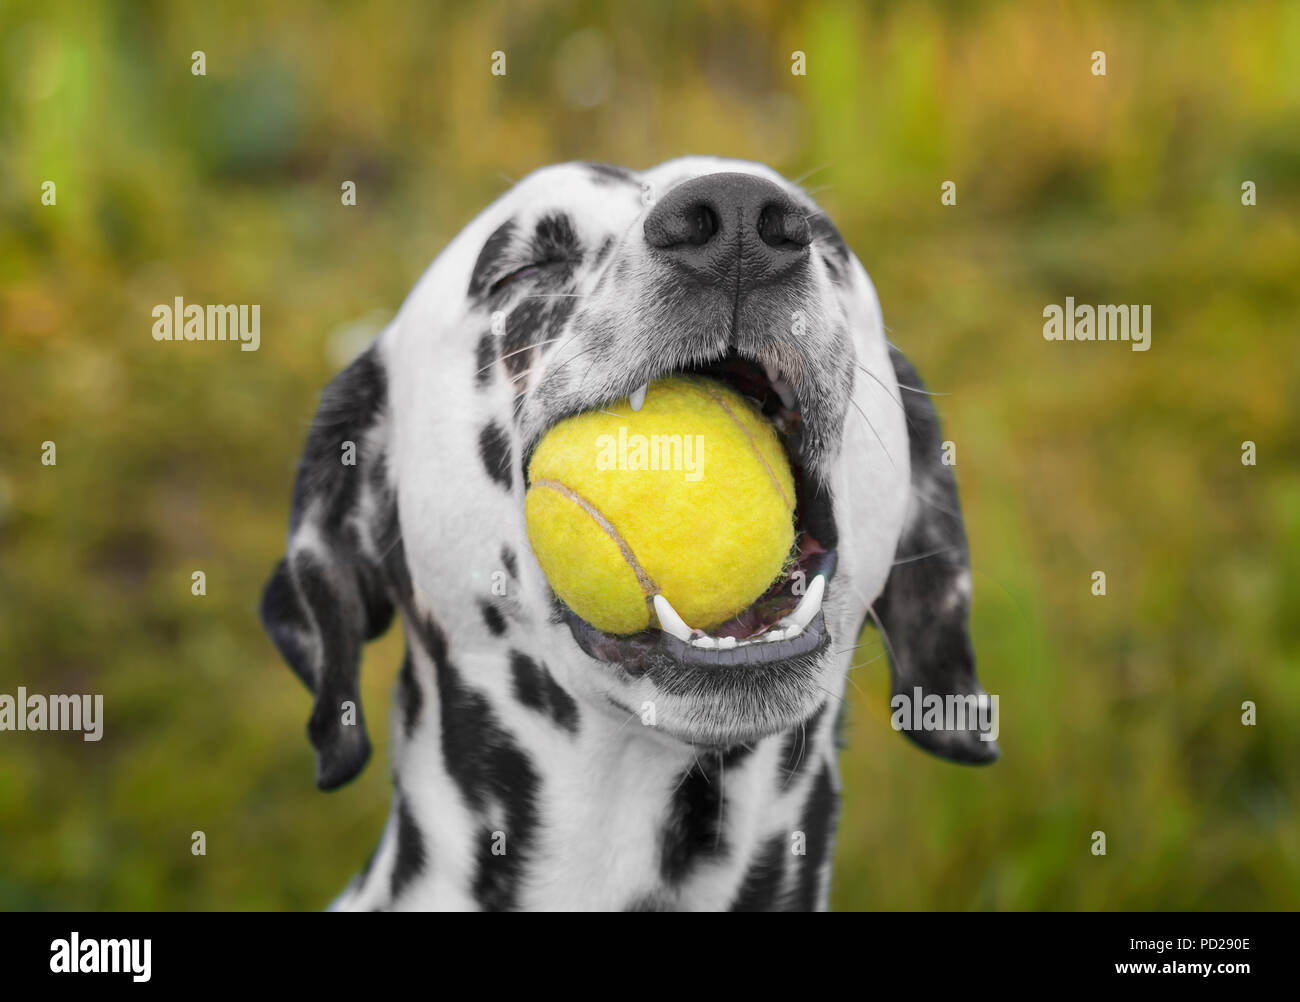 Cute dalmatian dog holding a ball in the mouth. Outdoor picture Stock Photo